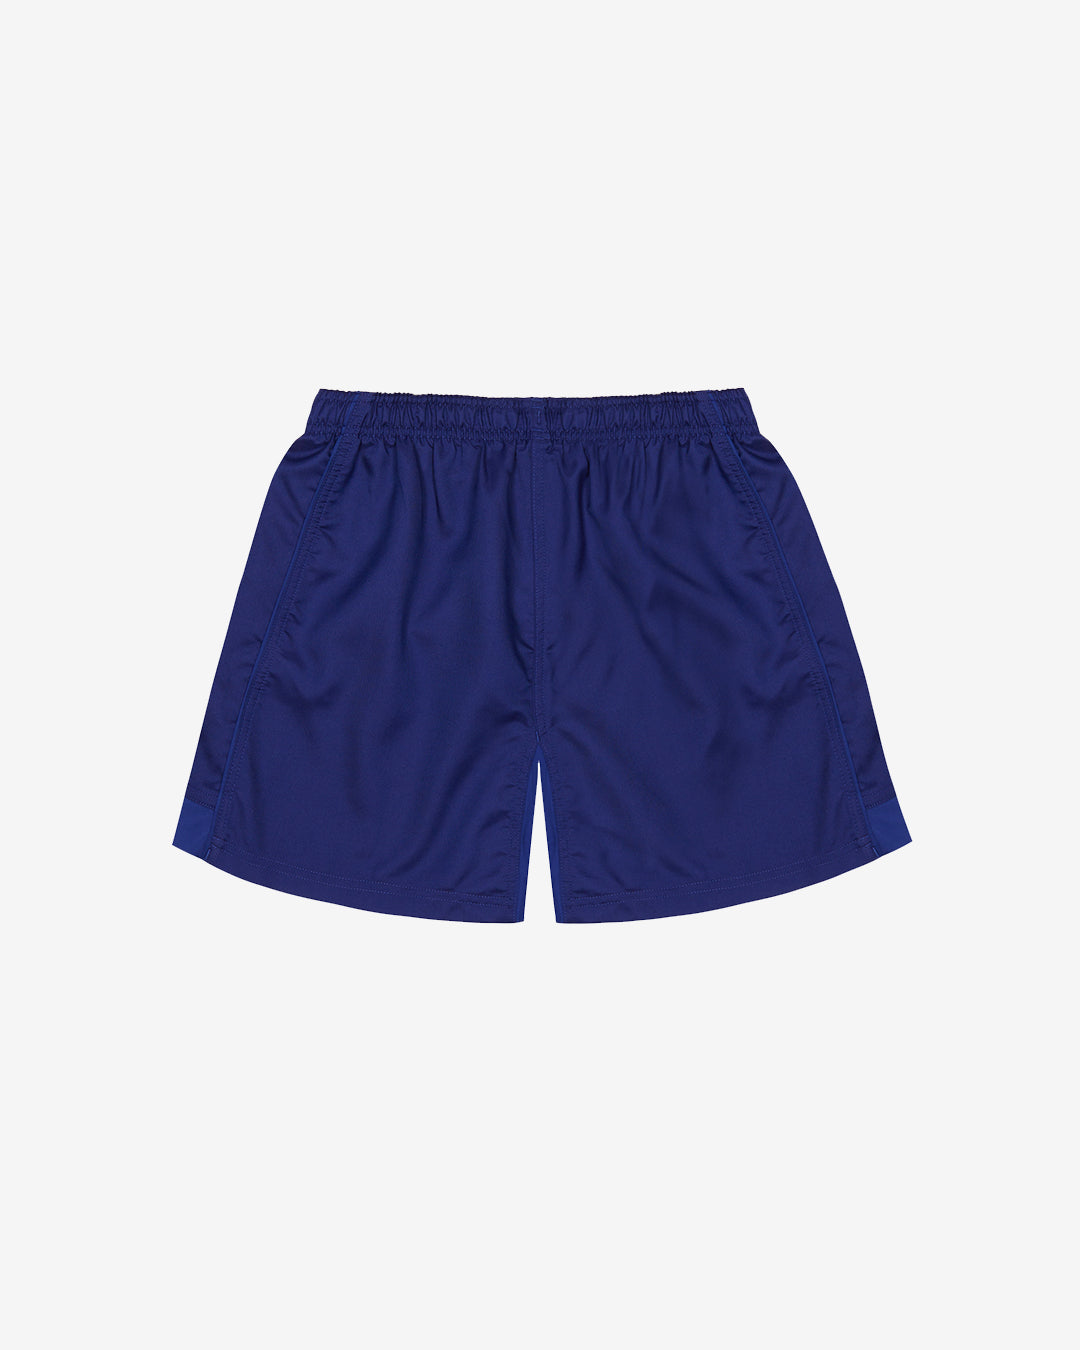 EP:0119 - Rugby Shorts - Royal Blue